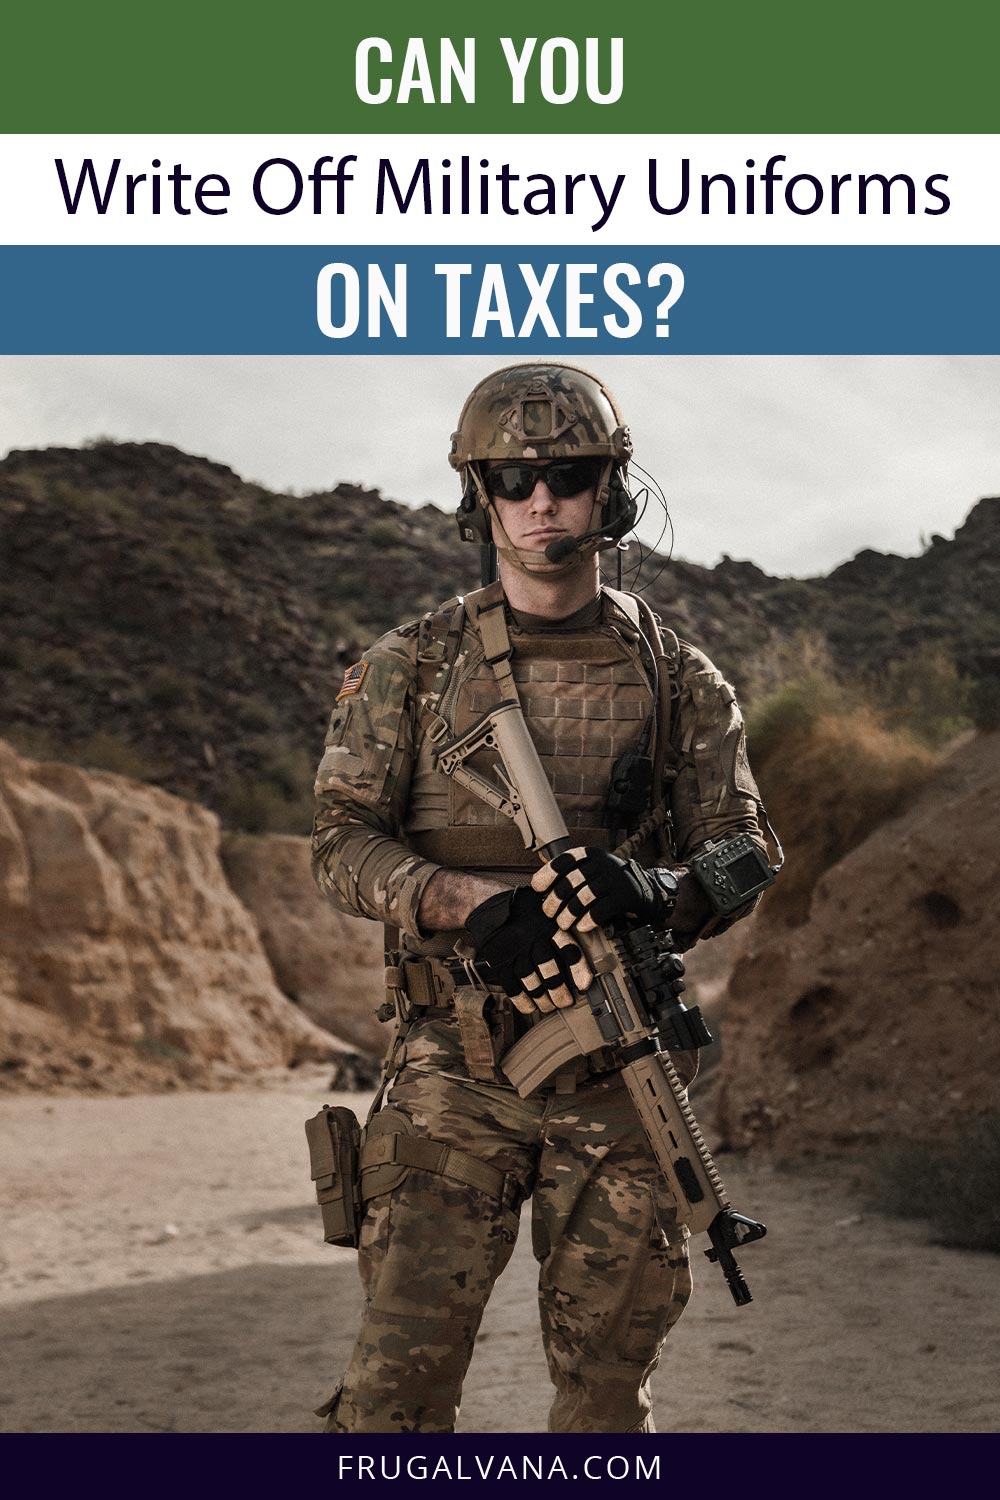 can-you-write-off-military-uniforms-on-taxes-frugalvana